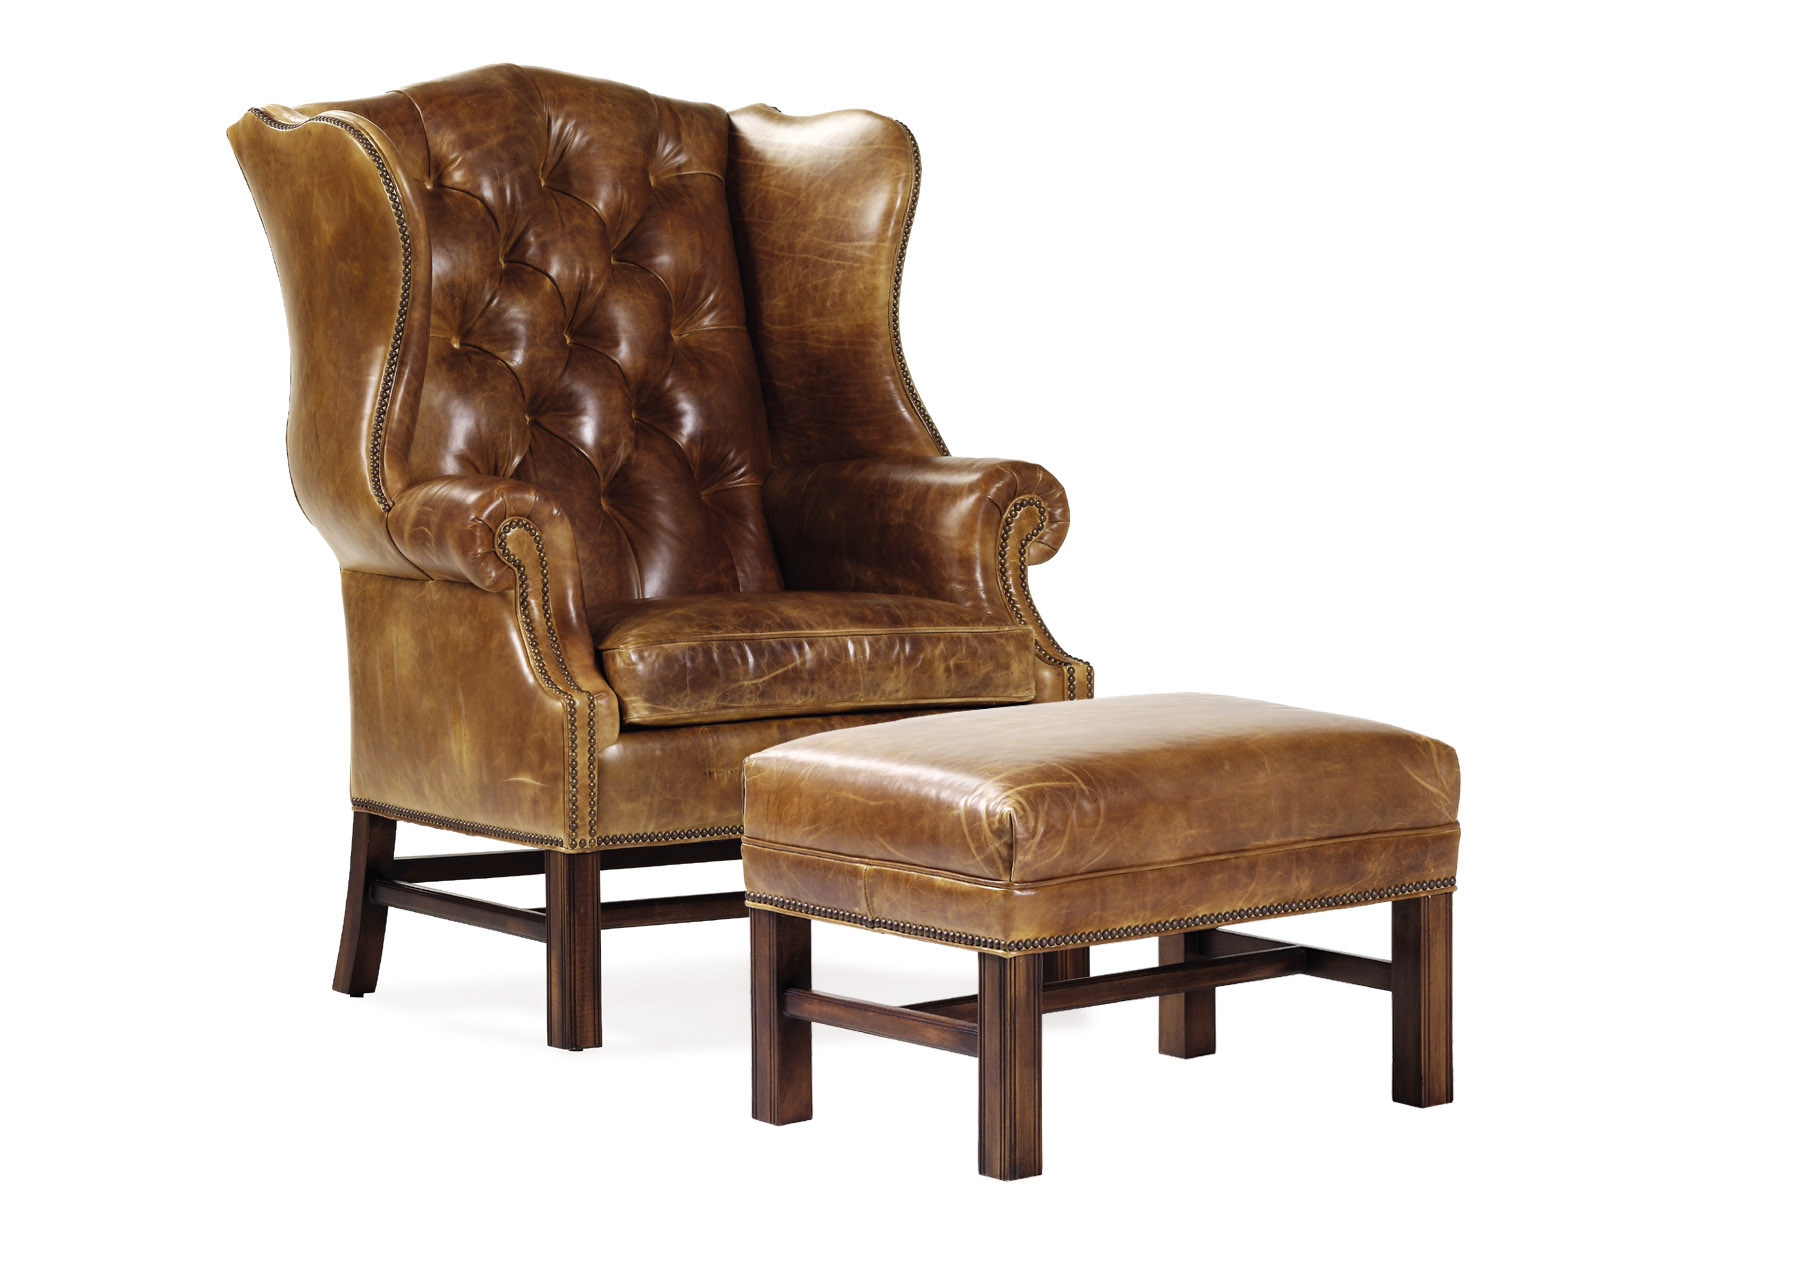 EAST BAY TUFTED WING CHAIR